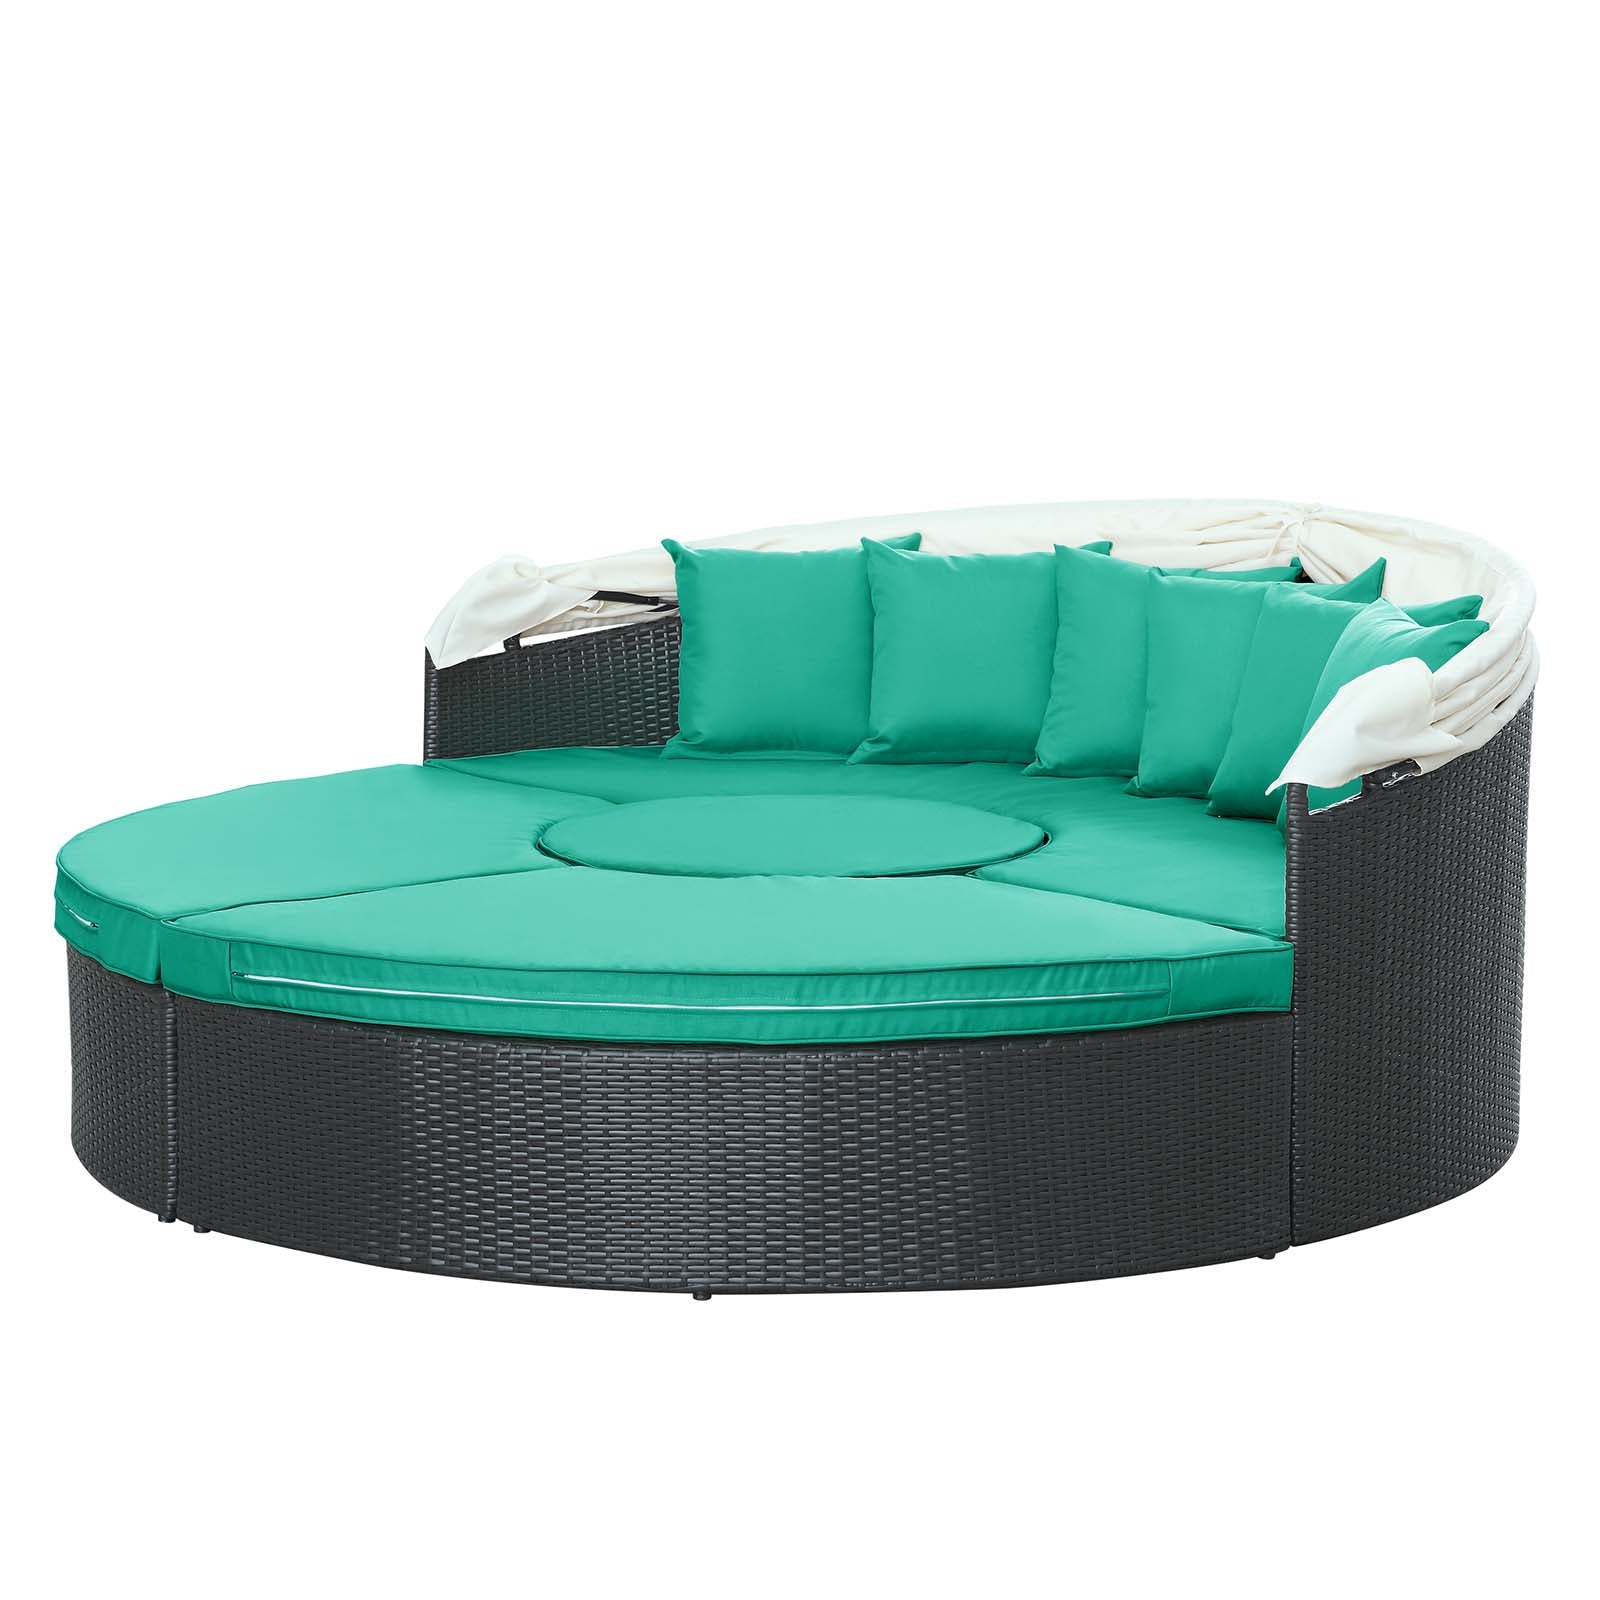 Modway Patio Daybeds - Quest Canopy Outdoor Patio Daybed Espresso Turquoise